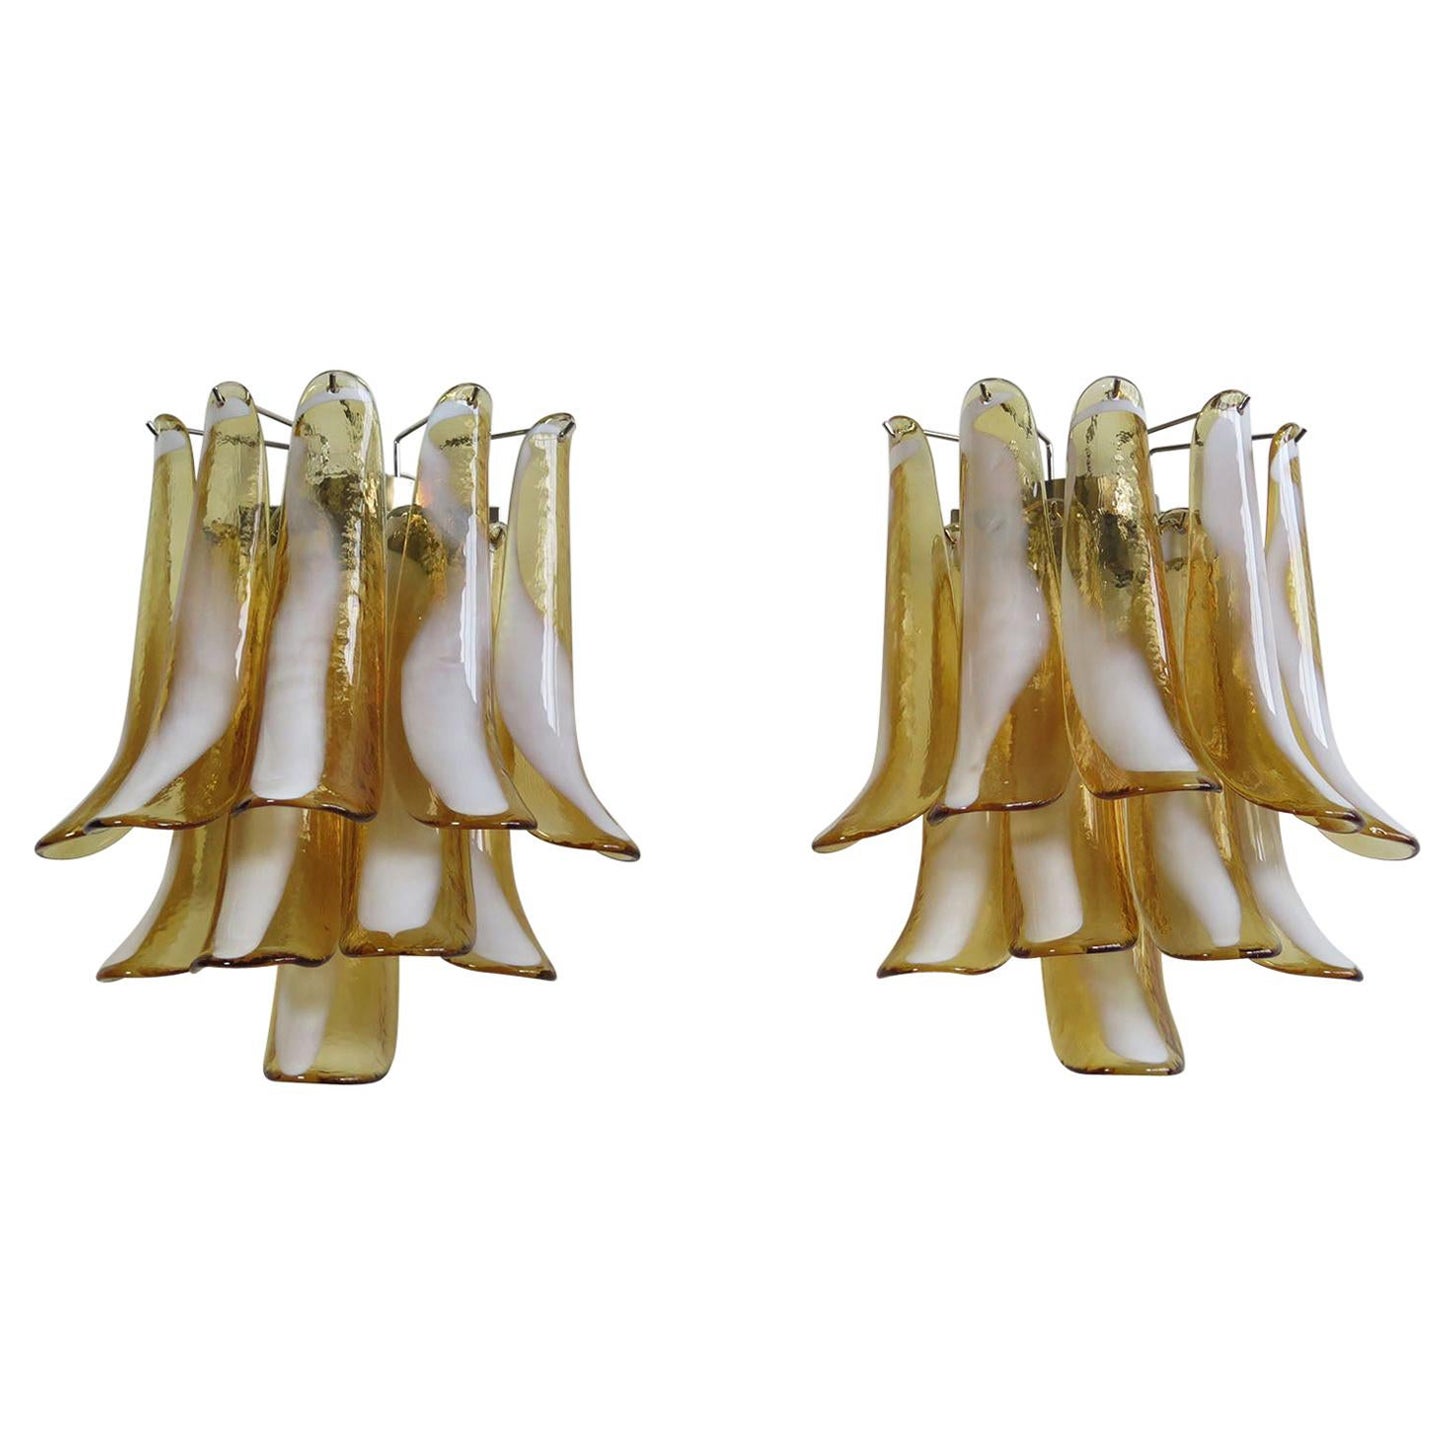 1970s Pair of Vintage Italian Murano Wall Lights in the Manner of Mazzega, Car